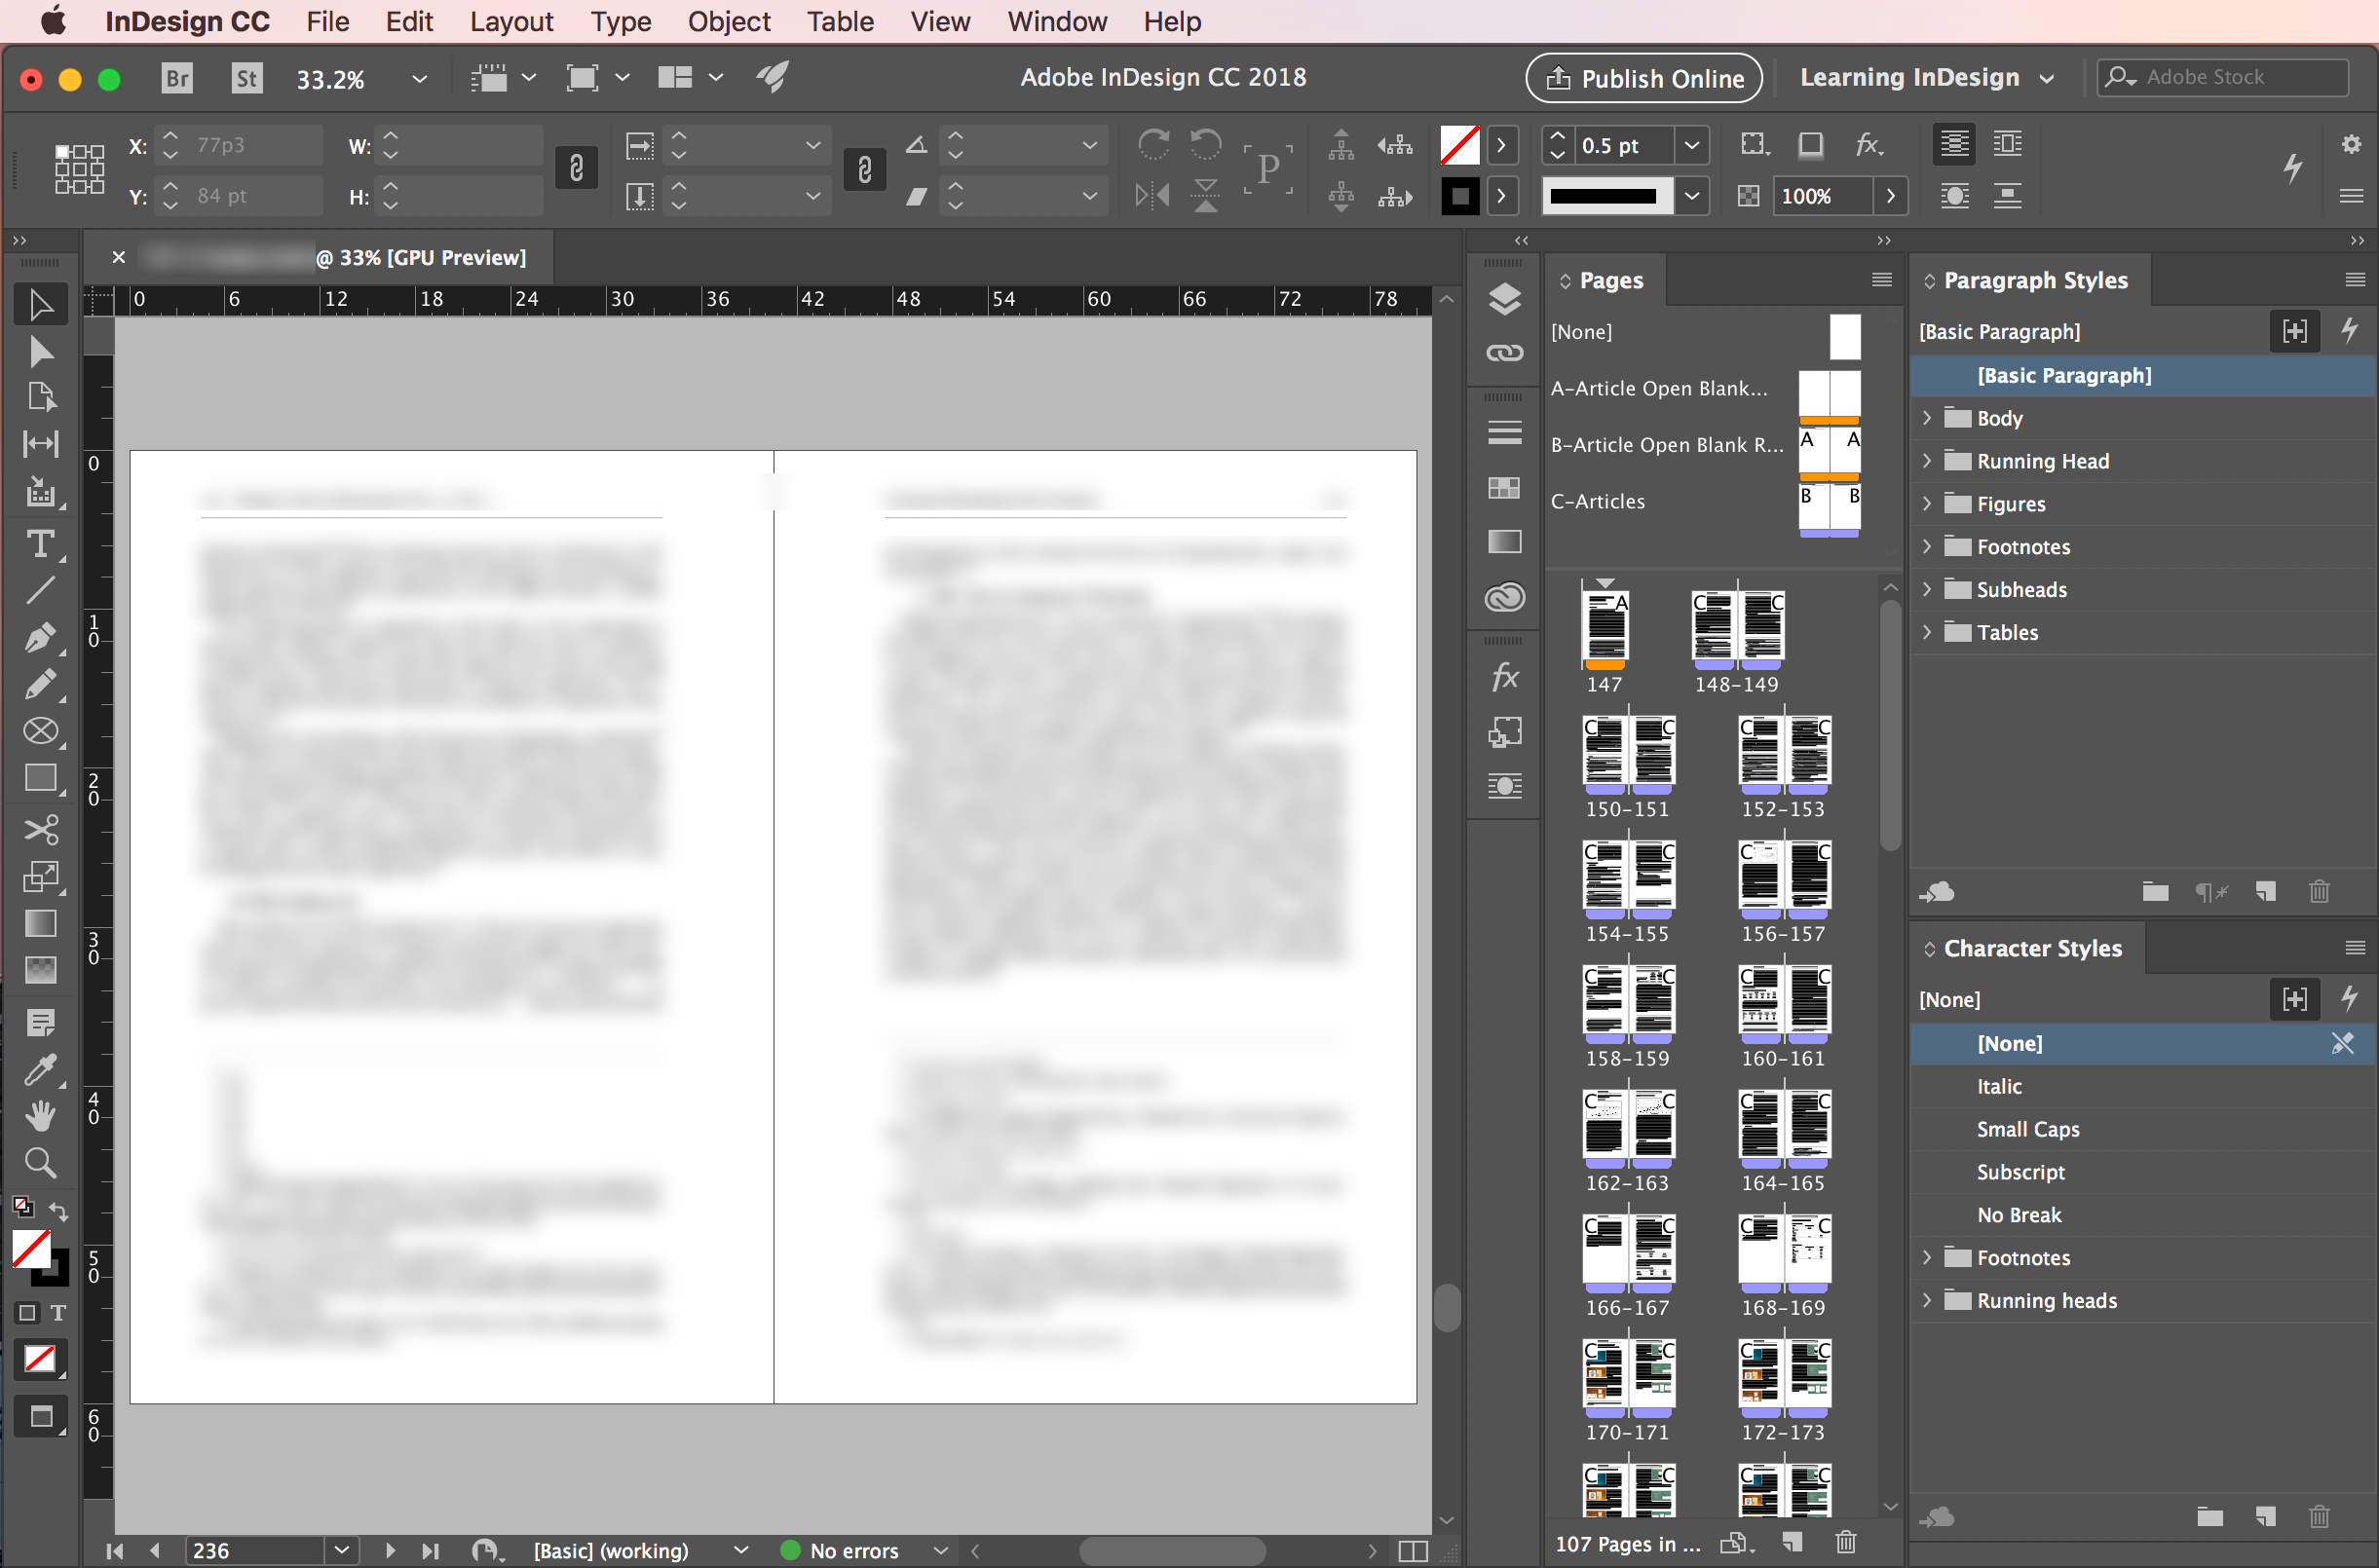 adobe indesign cc 2018 free download full version with crack